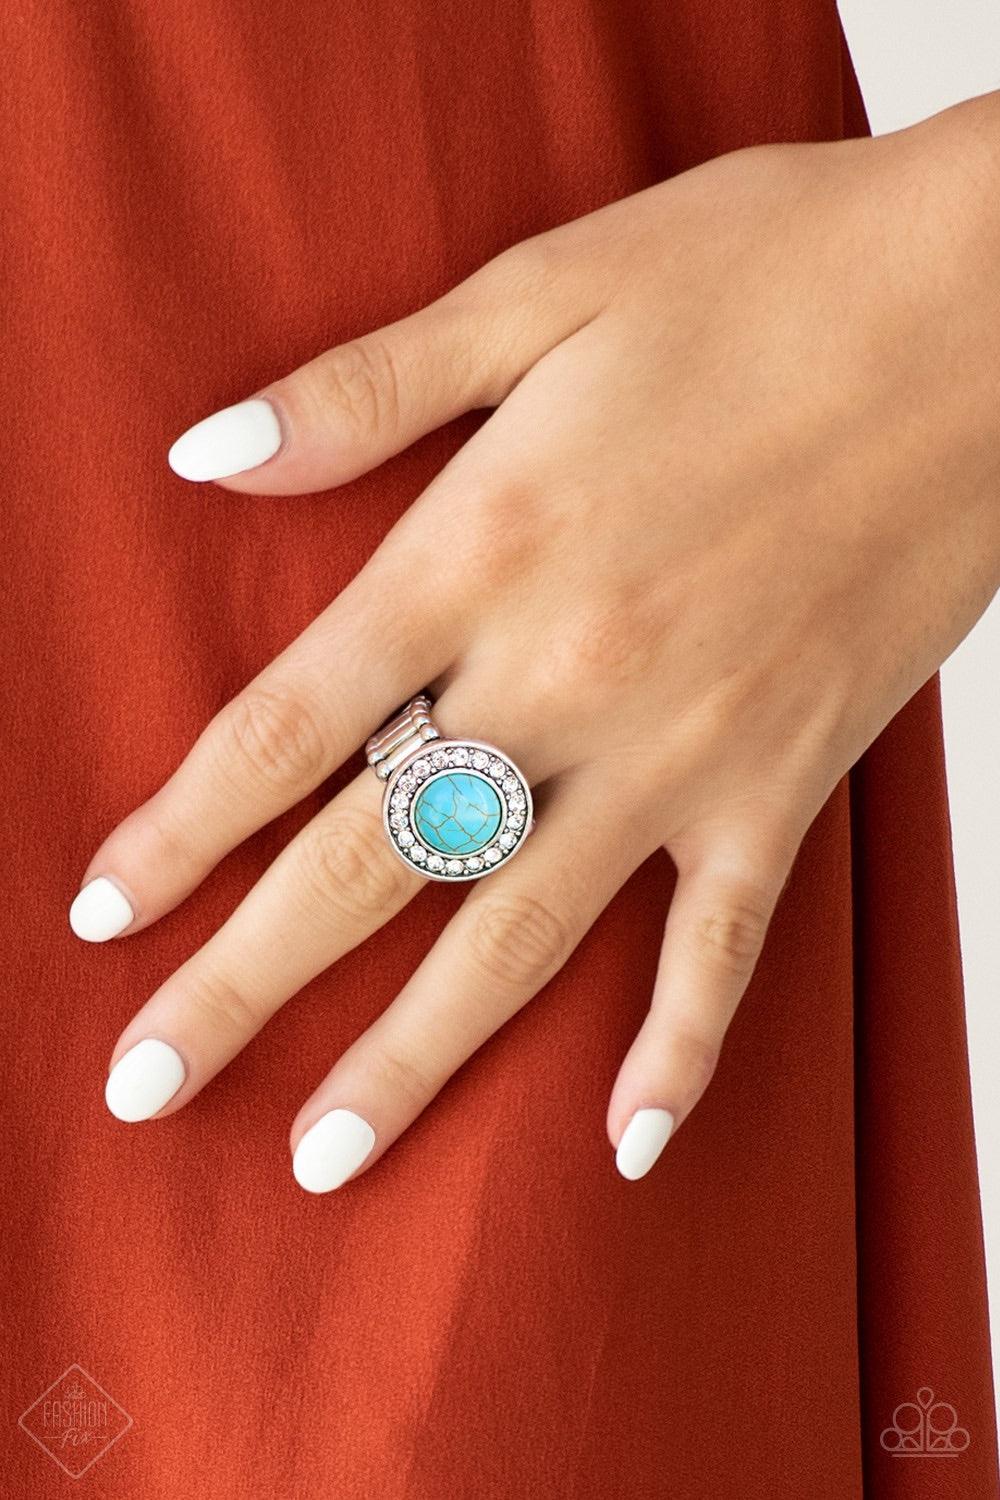 Paparazzi Accessories Rugged Radiance - Blue A refreshing turquoise stone is pressed into the center of a round silver frame radiating with glassy white rhinestones, creating an earthy, yet refined design. Features a stretchy band for a flexible fit. Jewe